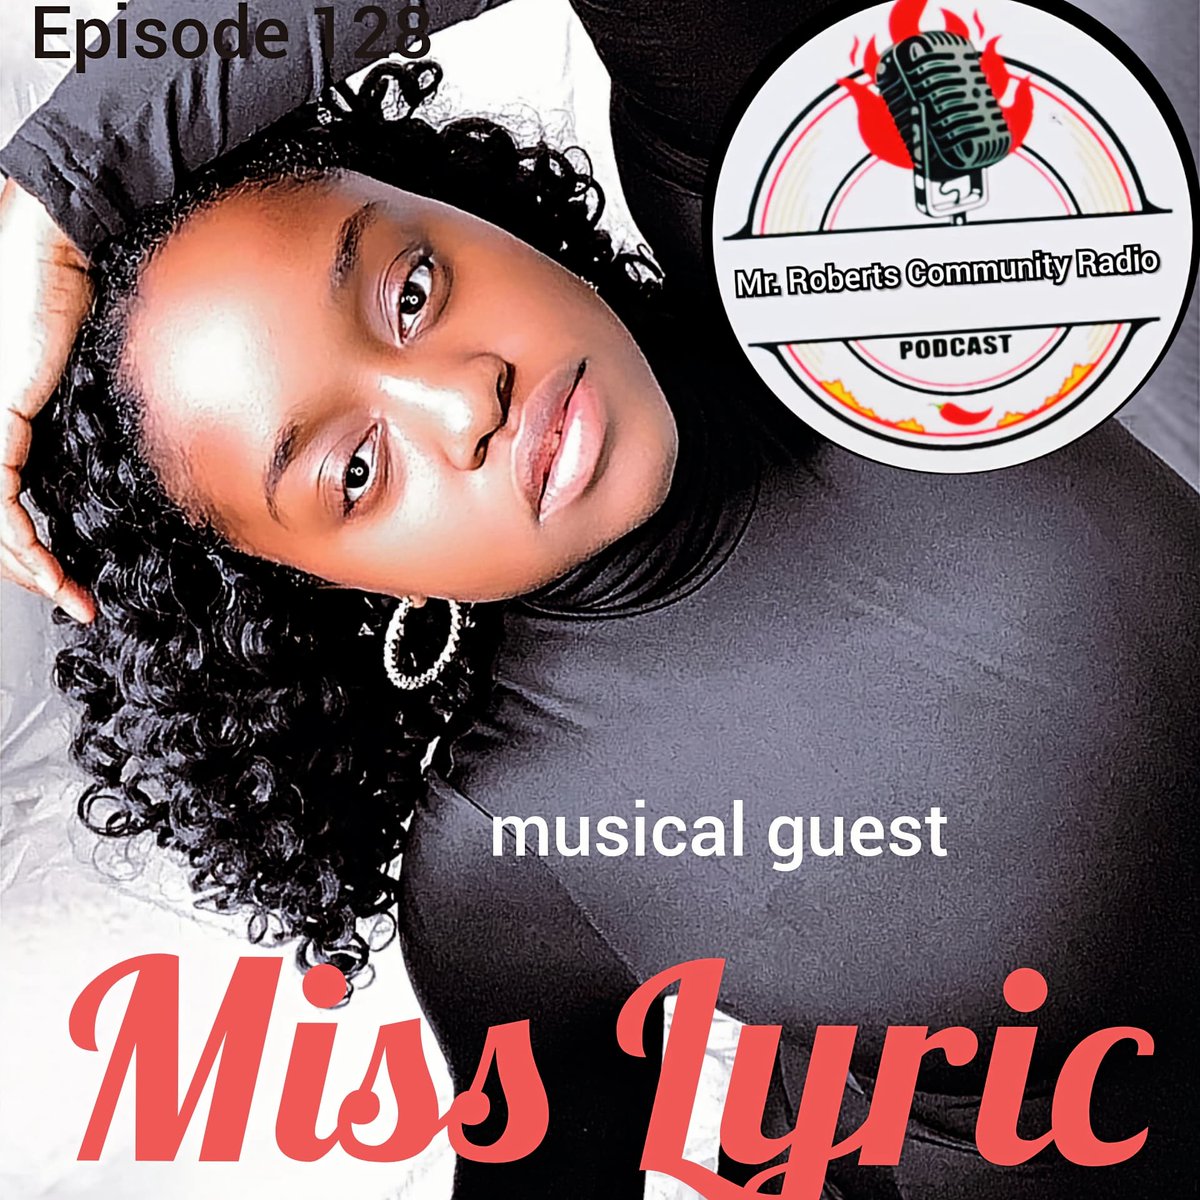 Episode 128 | 'POV' is now available! Special & musical guest is Miss Lyric with her song 'Rushing Into Nothing'| Free link below 
 anchor.fm/mr-roberts-com… 

#podcast #spotify #anchorfm